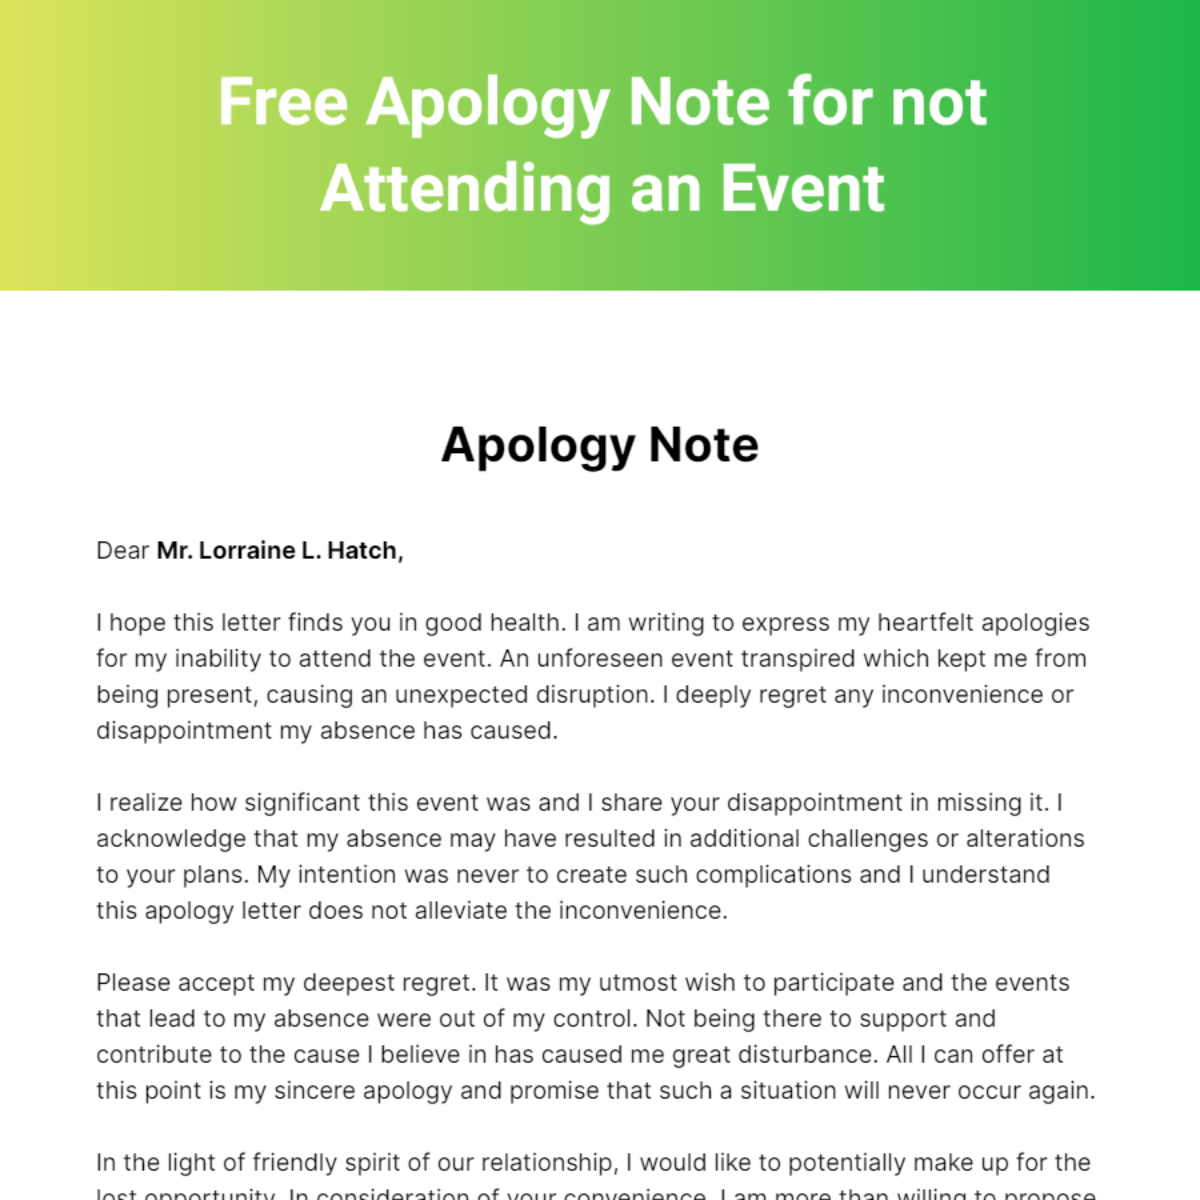 Apology Note for not Attending an Event Template